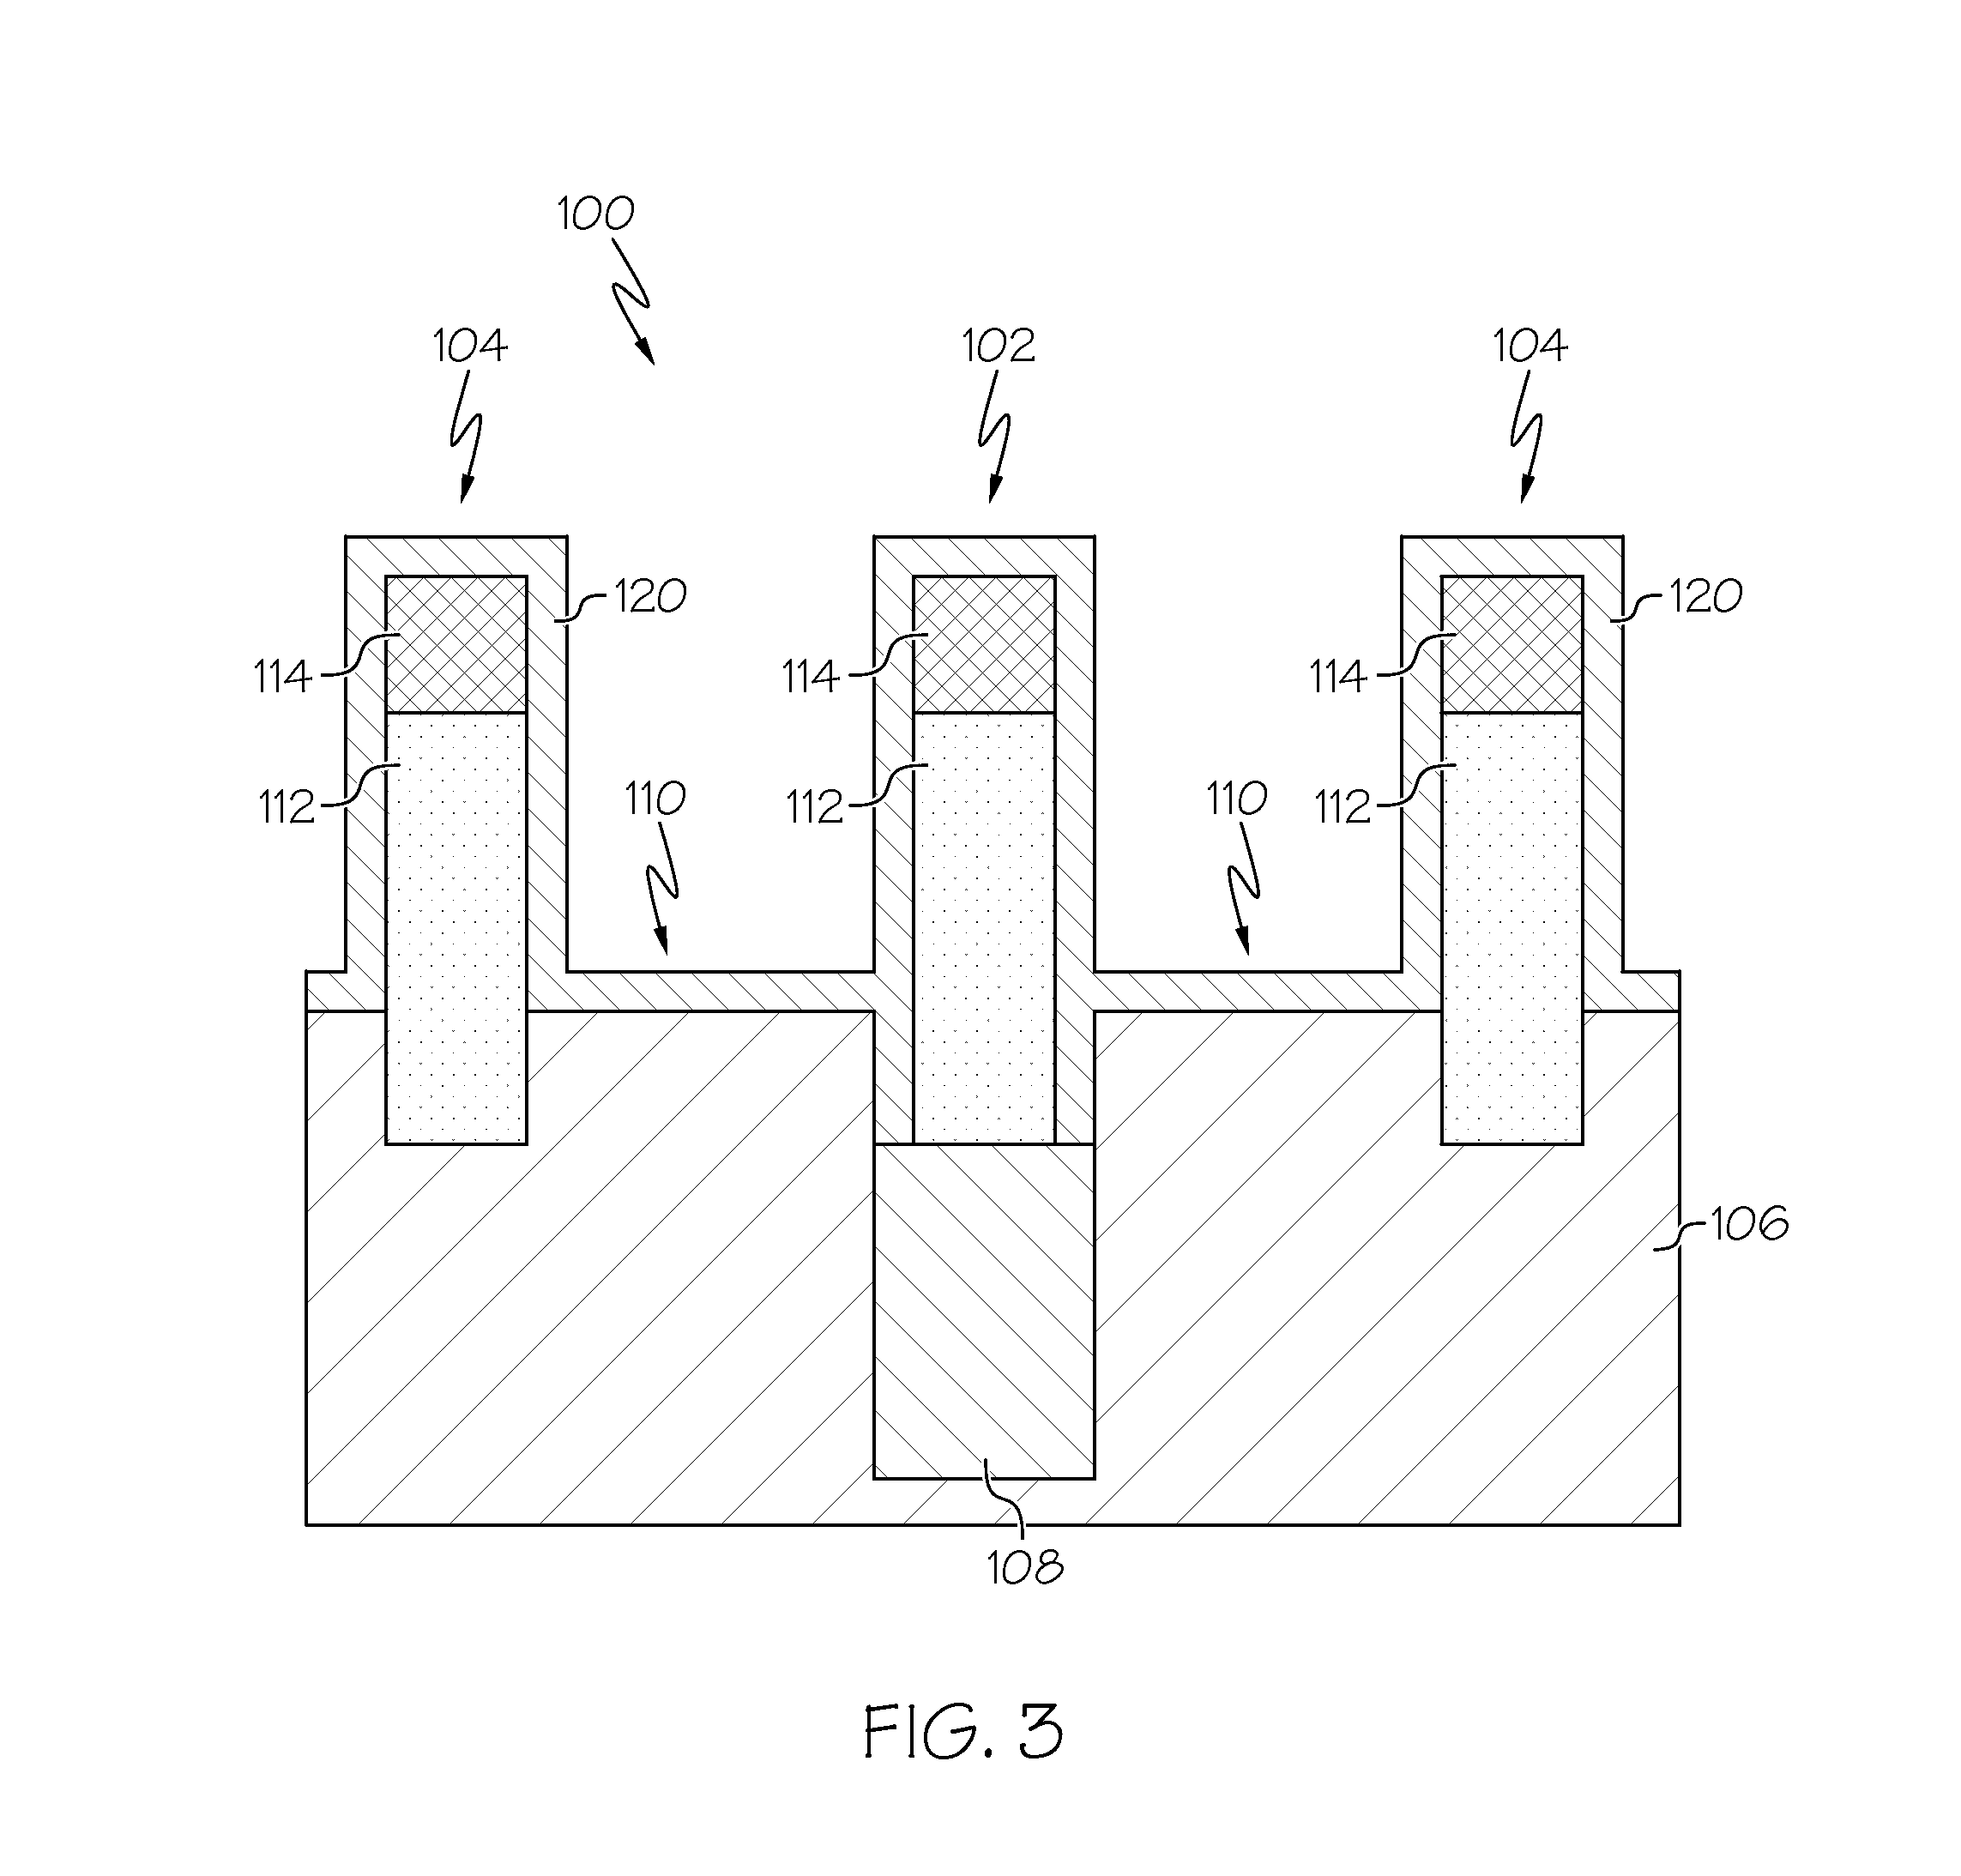 Epitaxial block layer for a fin field effect transistor device